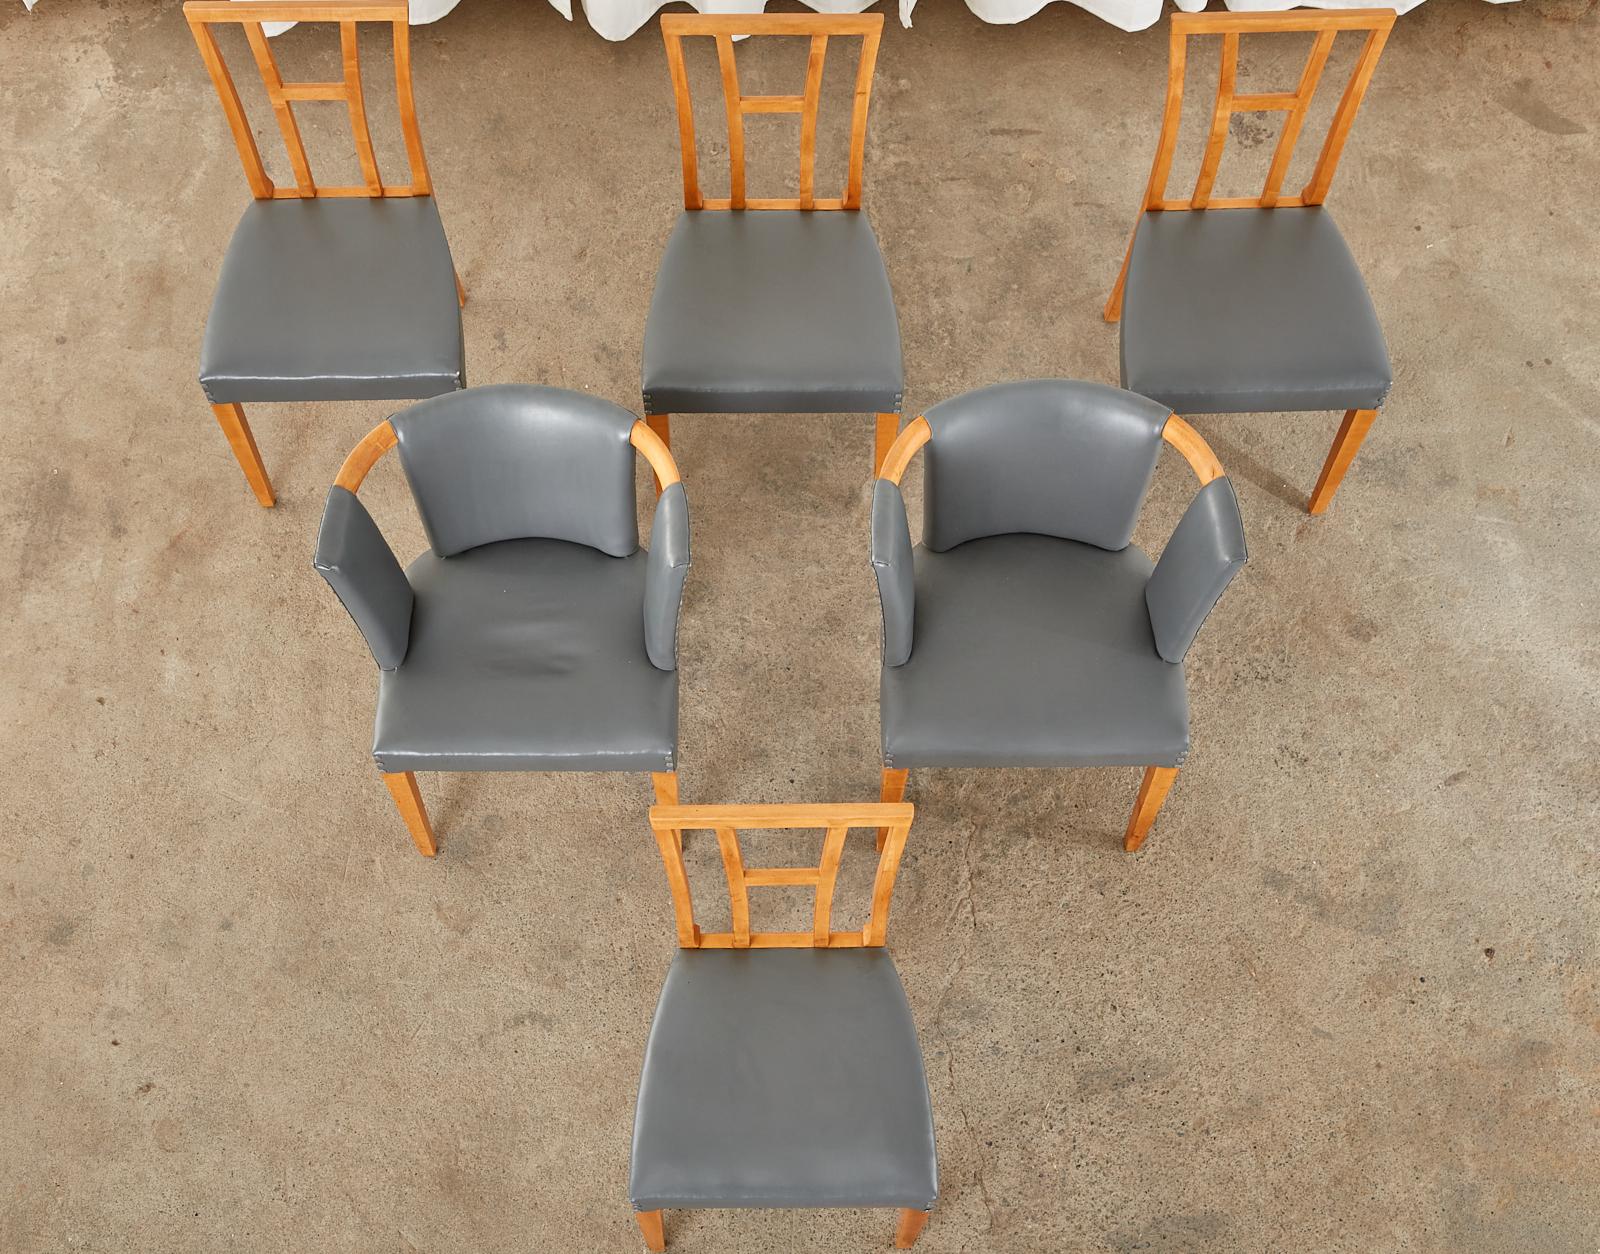 Rare Mid-Century Modern set of six dining chairs designed by Eliel Saarinen for Johnson Furniture Co. The set consists of four side chairs, and two rare barrel-back chairs measuring 23 inches wide x 30 inches high. The barrel chairs have a